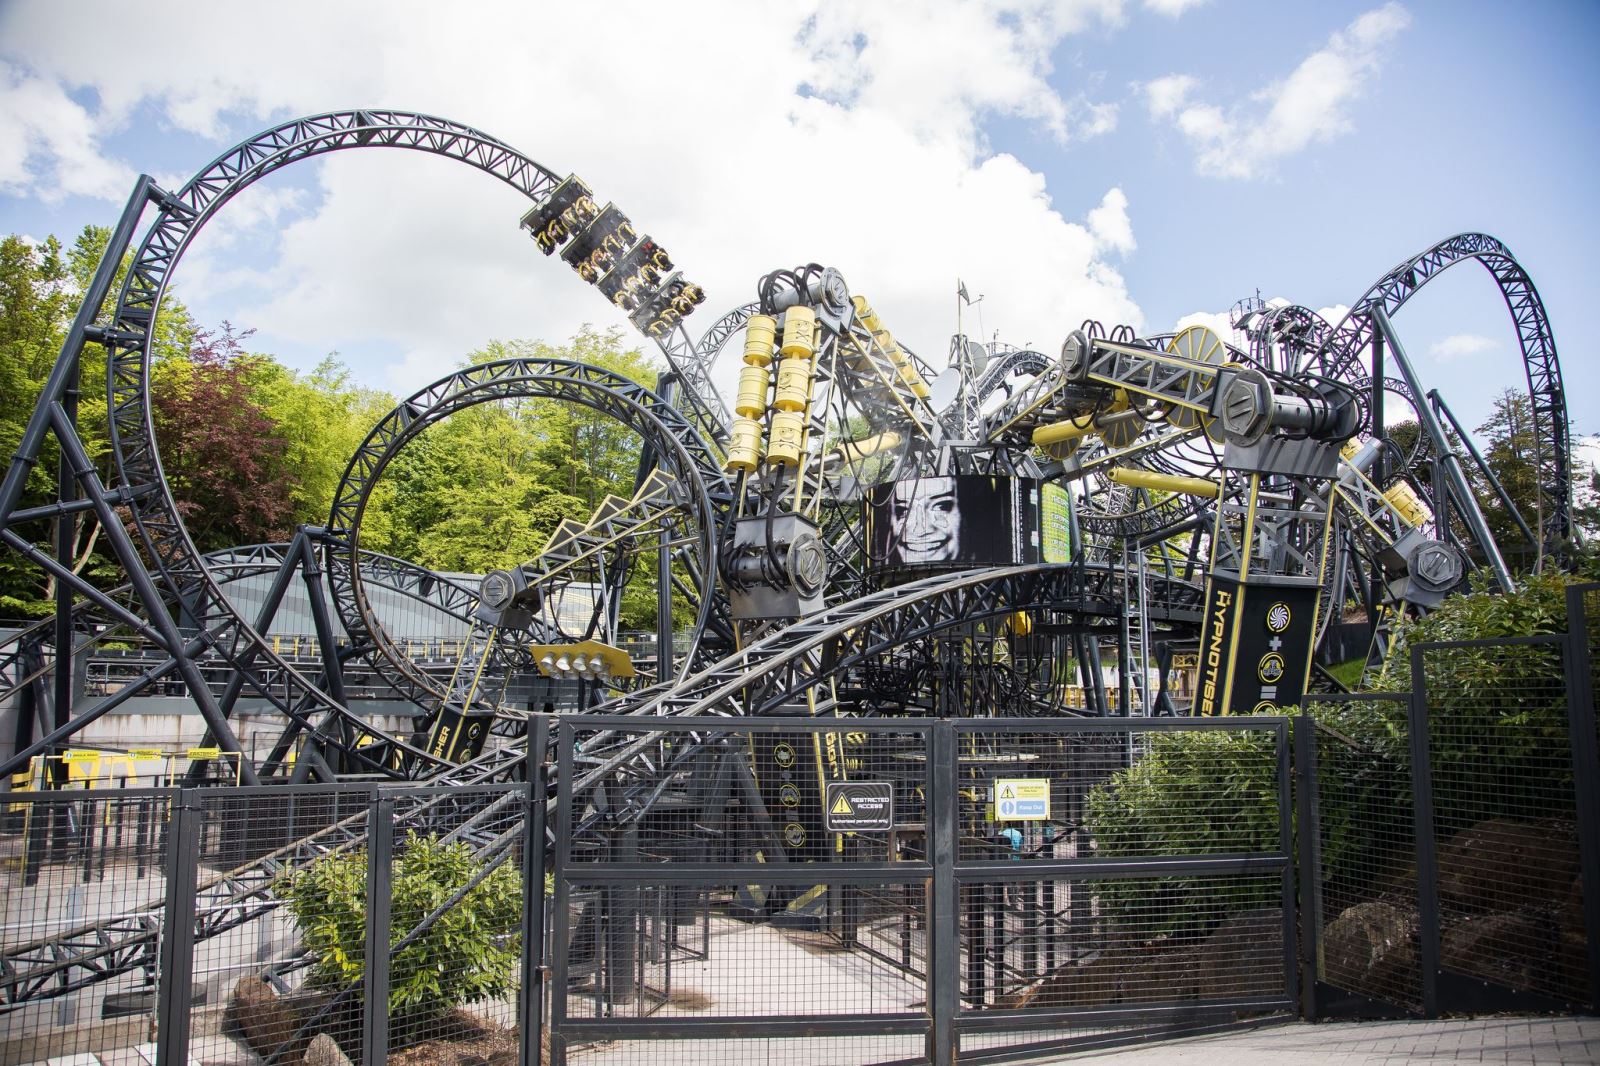 alton towers visit again for free